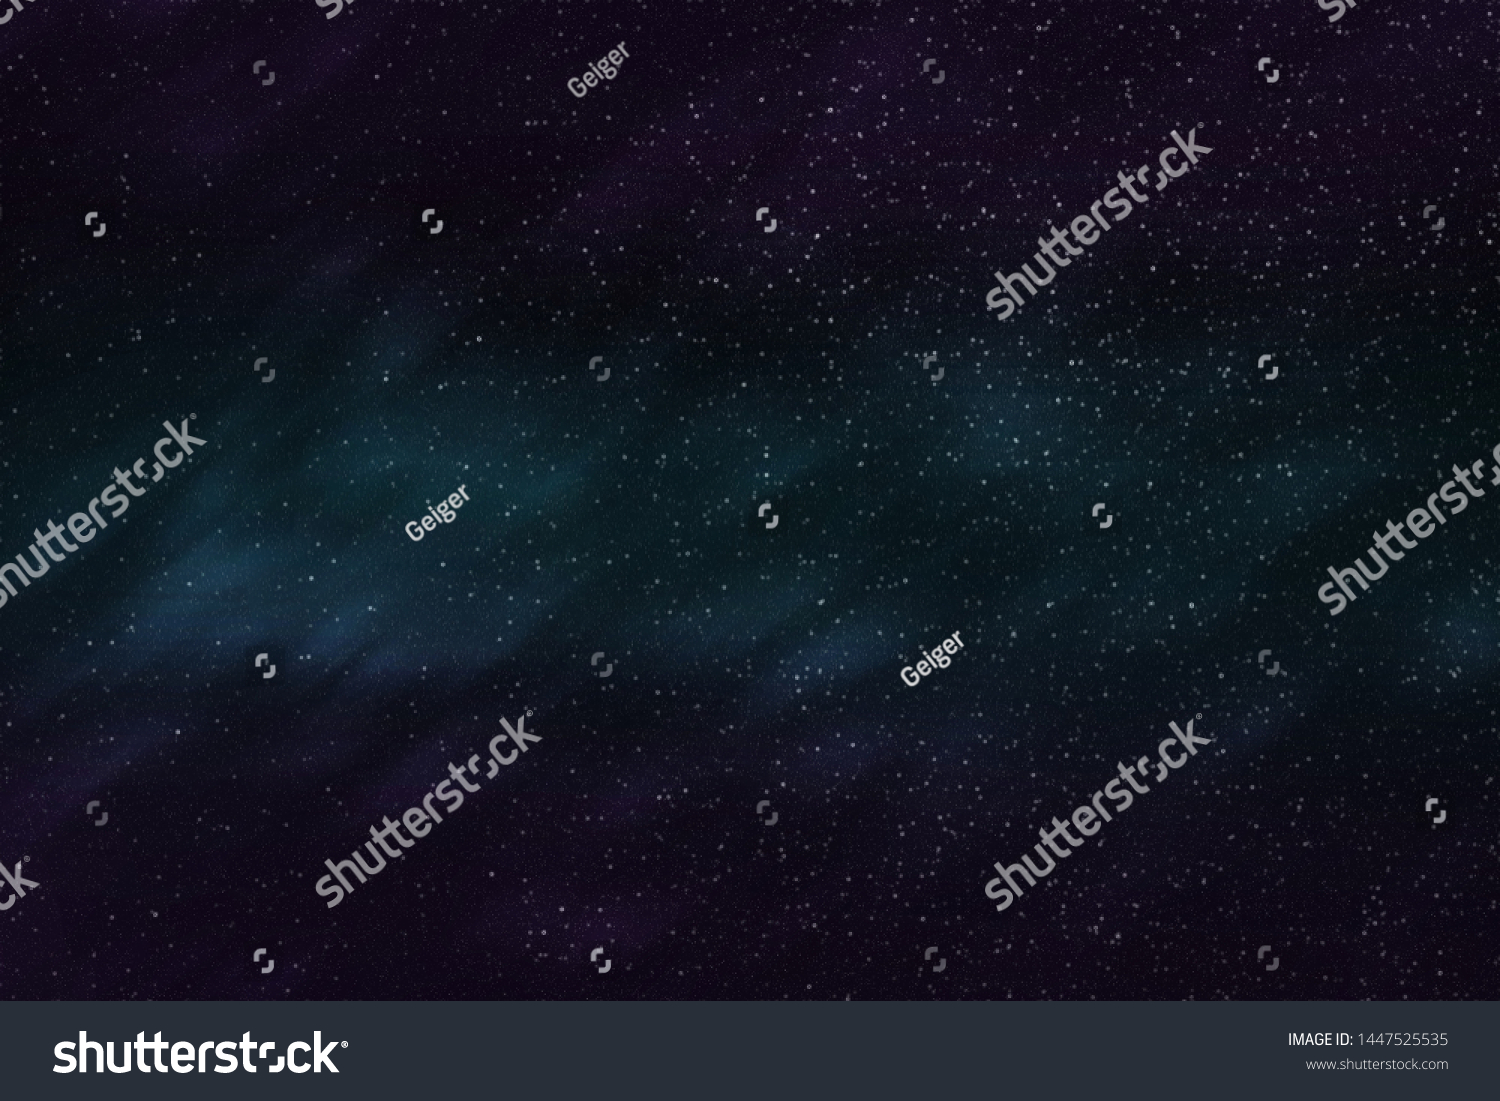 Abstract background texture of distant star space and multicolored nebula, illustration #1447525535